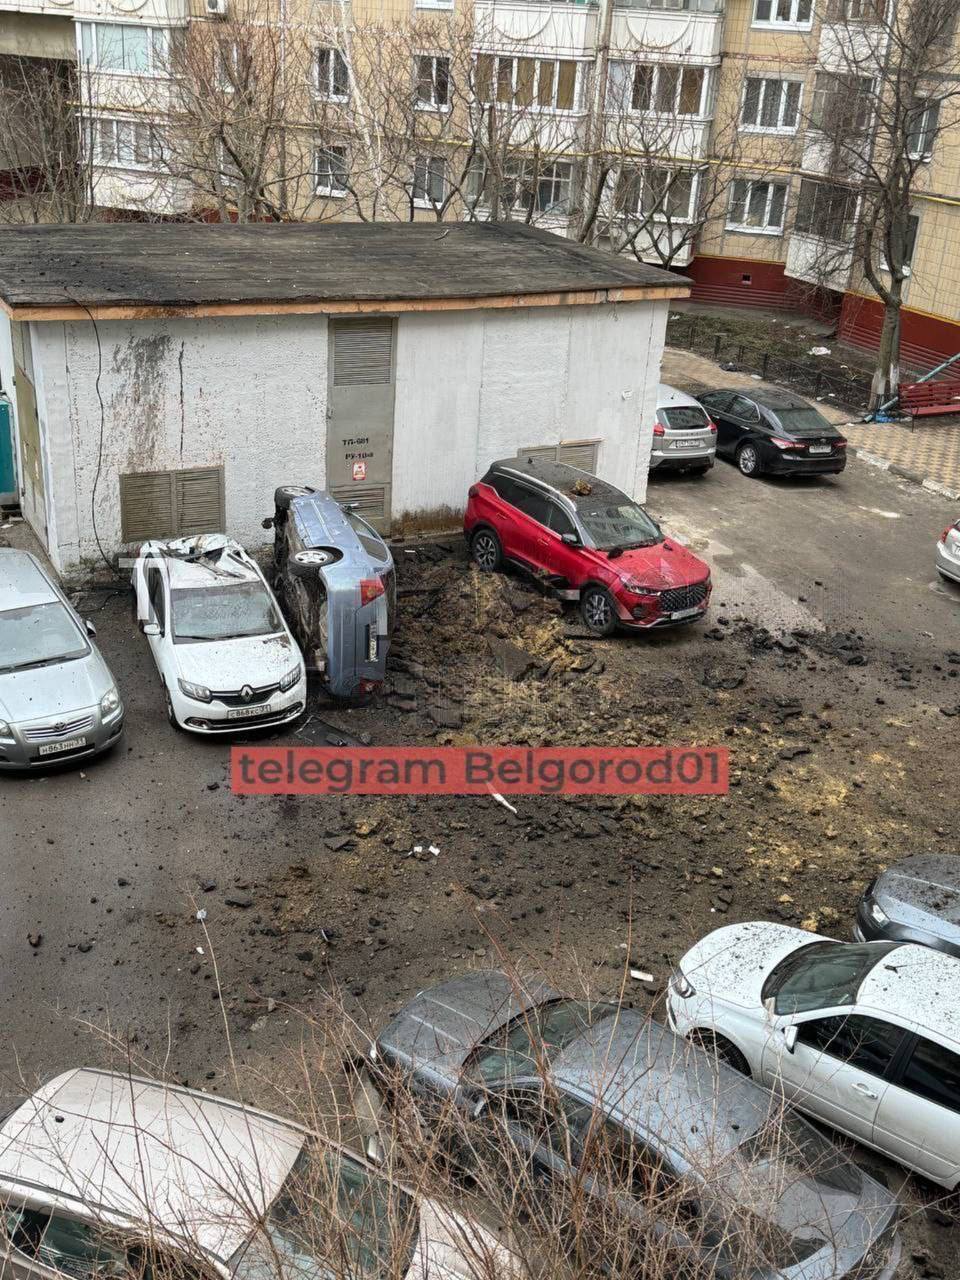 ''Barely dodged'': another morning in Belgorod begins with shelling, leaving Russians on edge